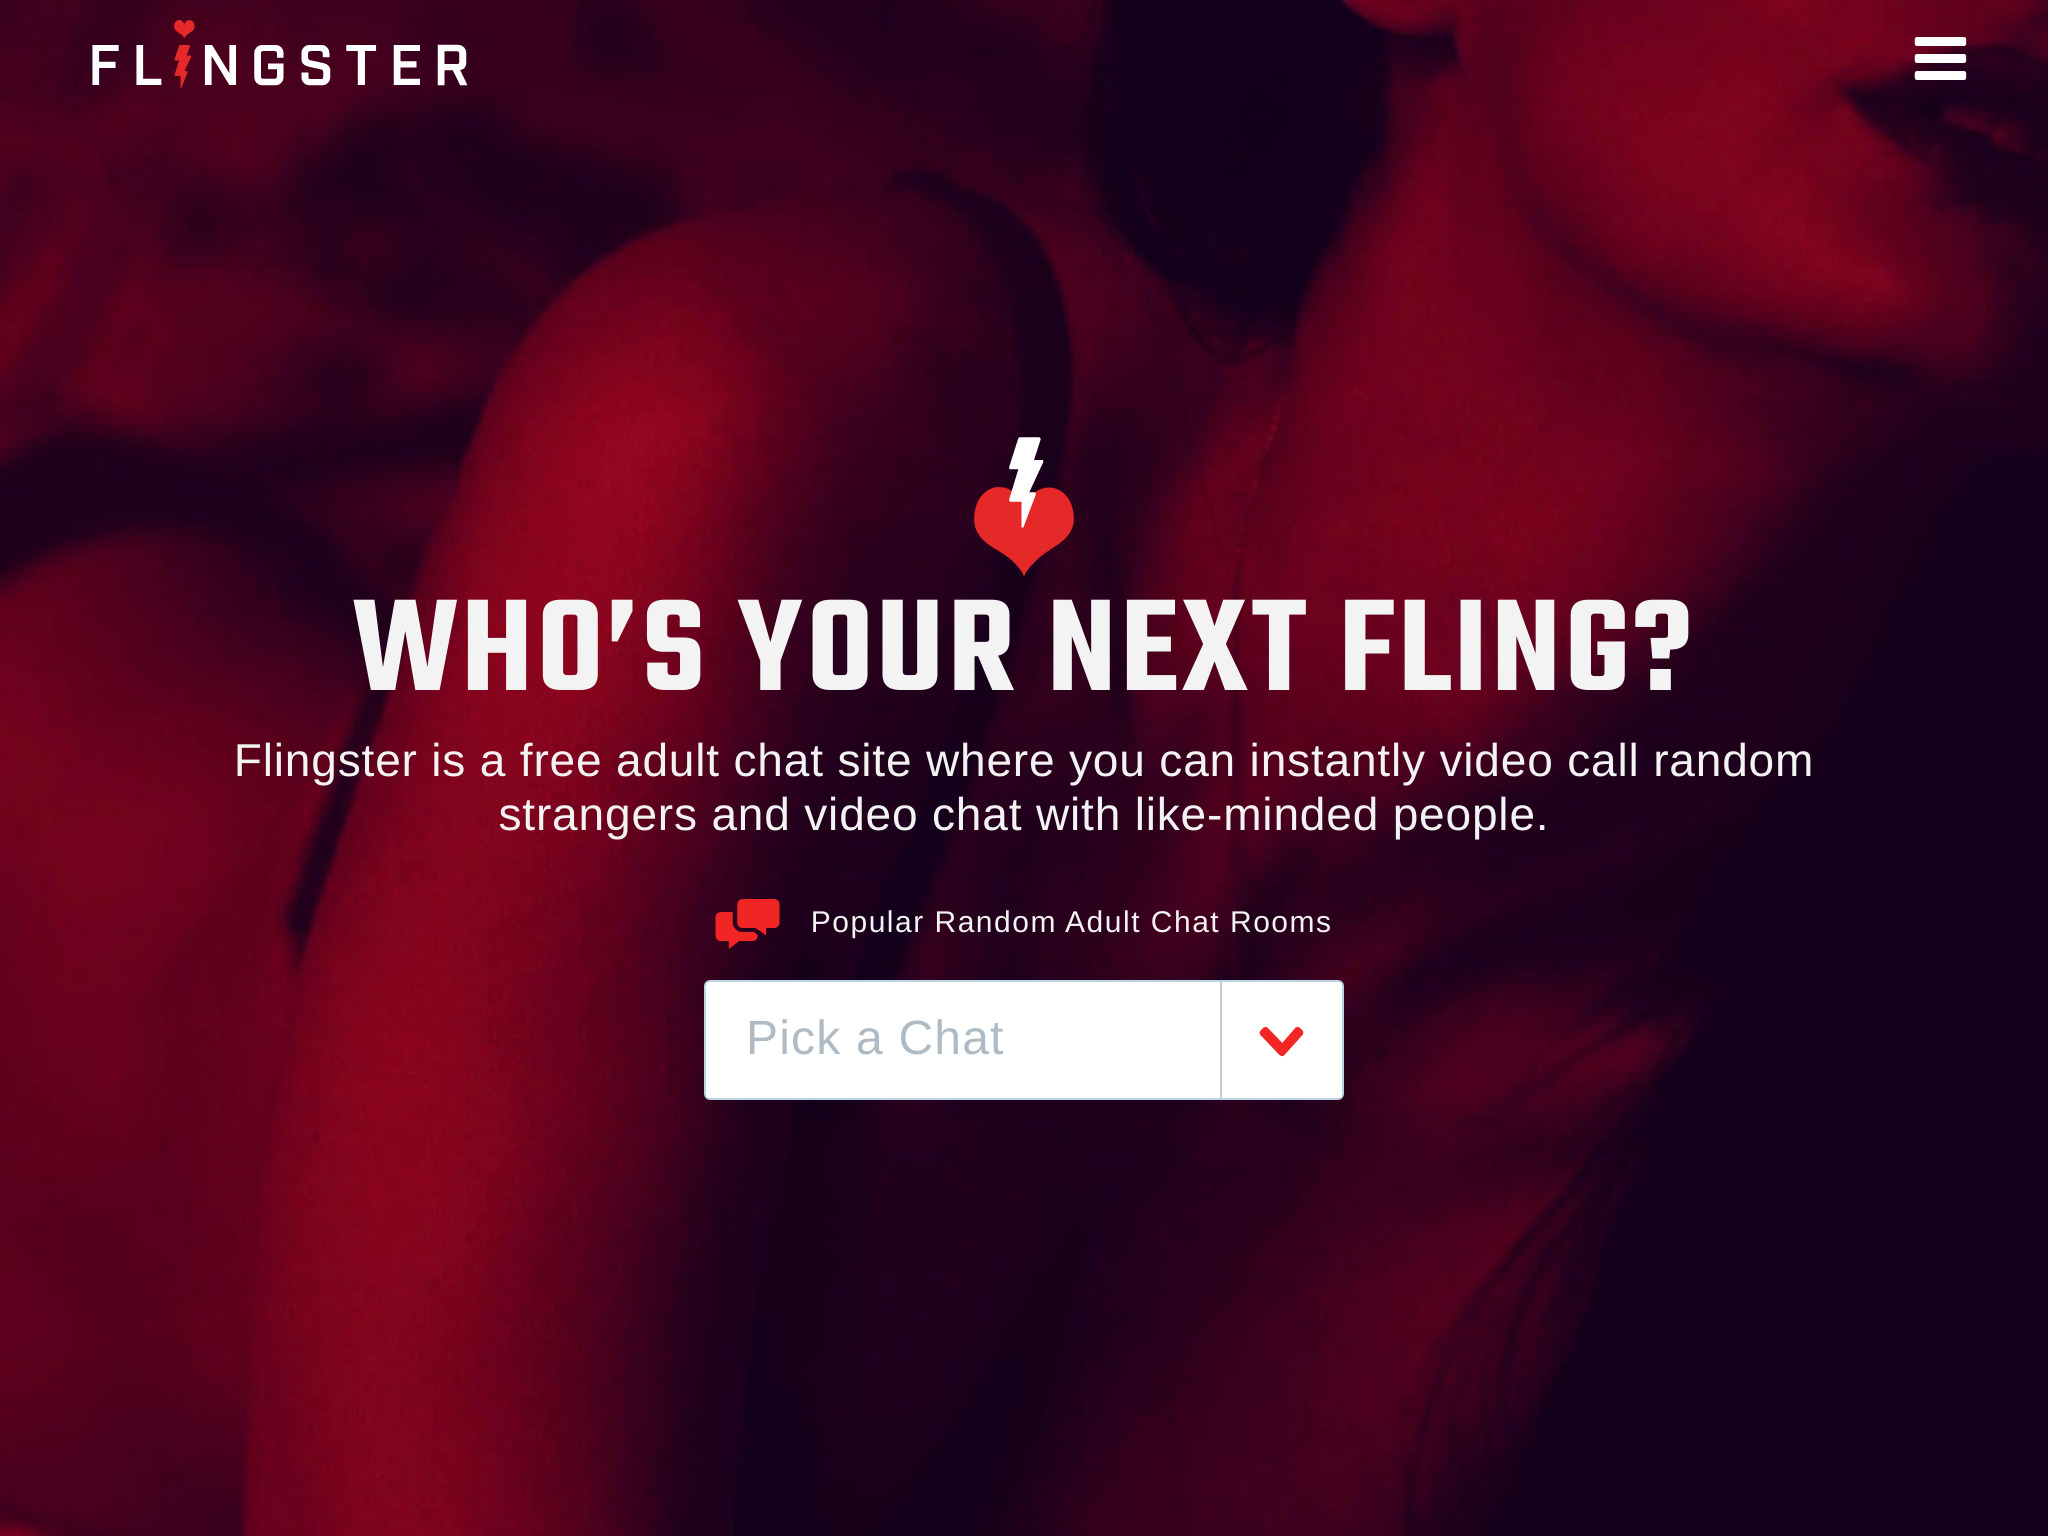 Seeking Something Special? – Check Our Flingster Review